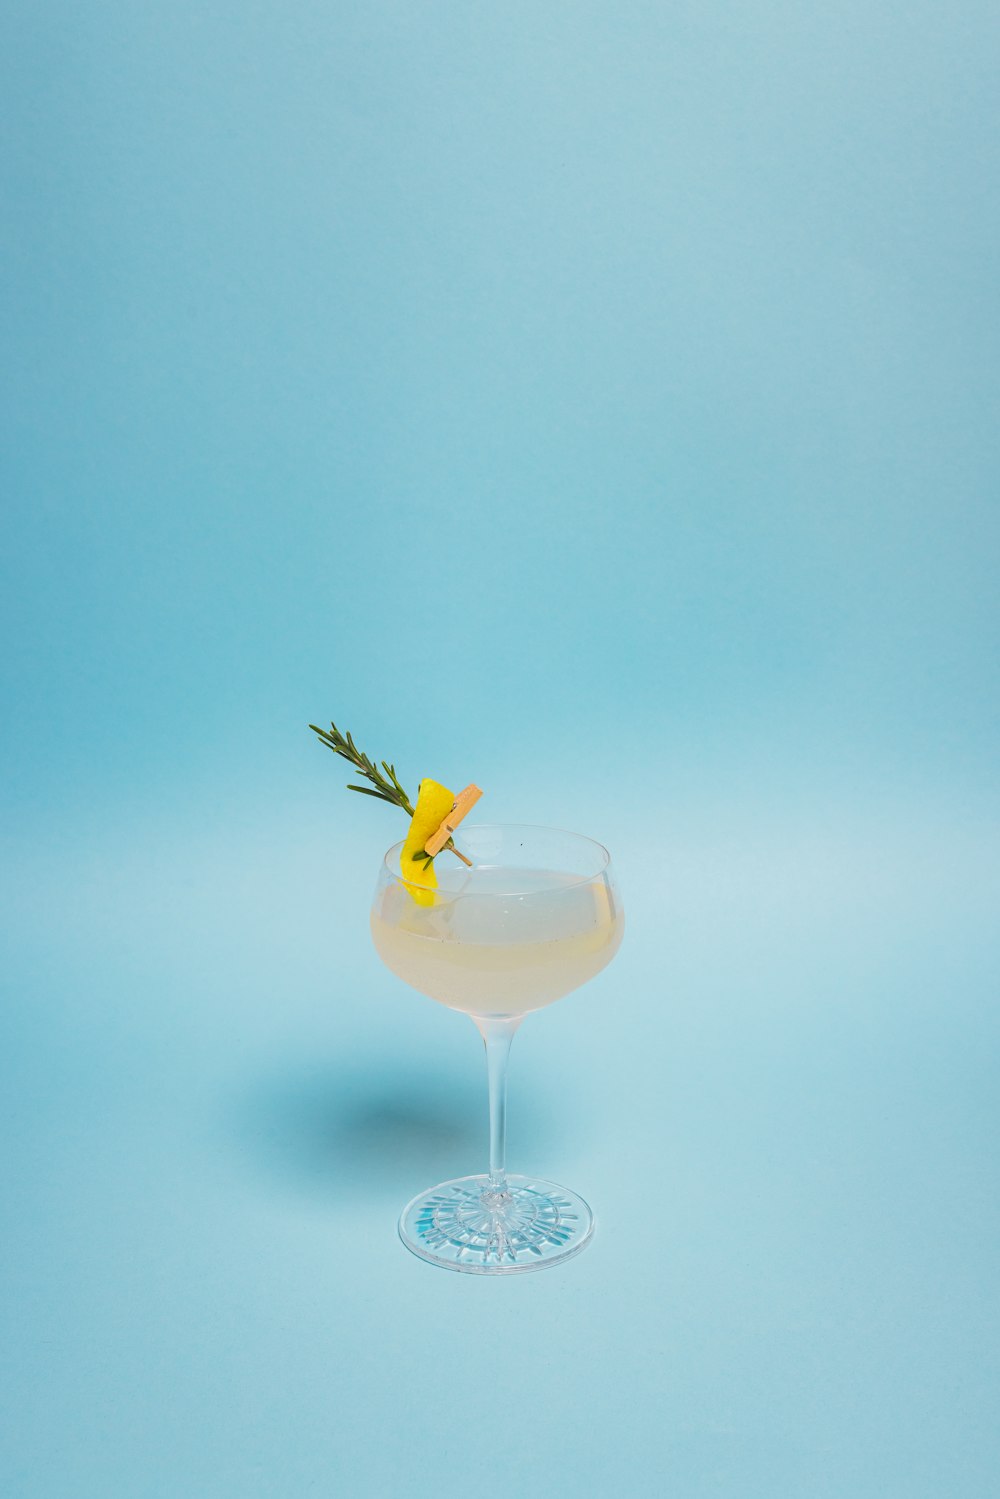 a small glass filled with a drink on a blue background